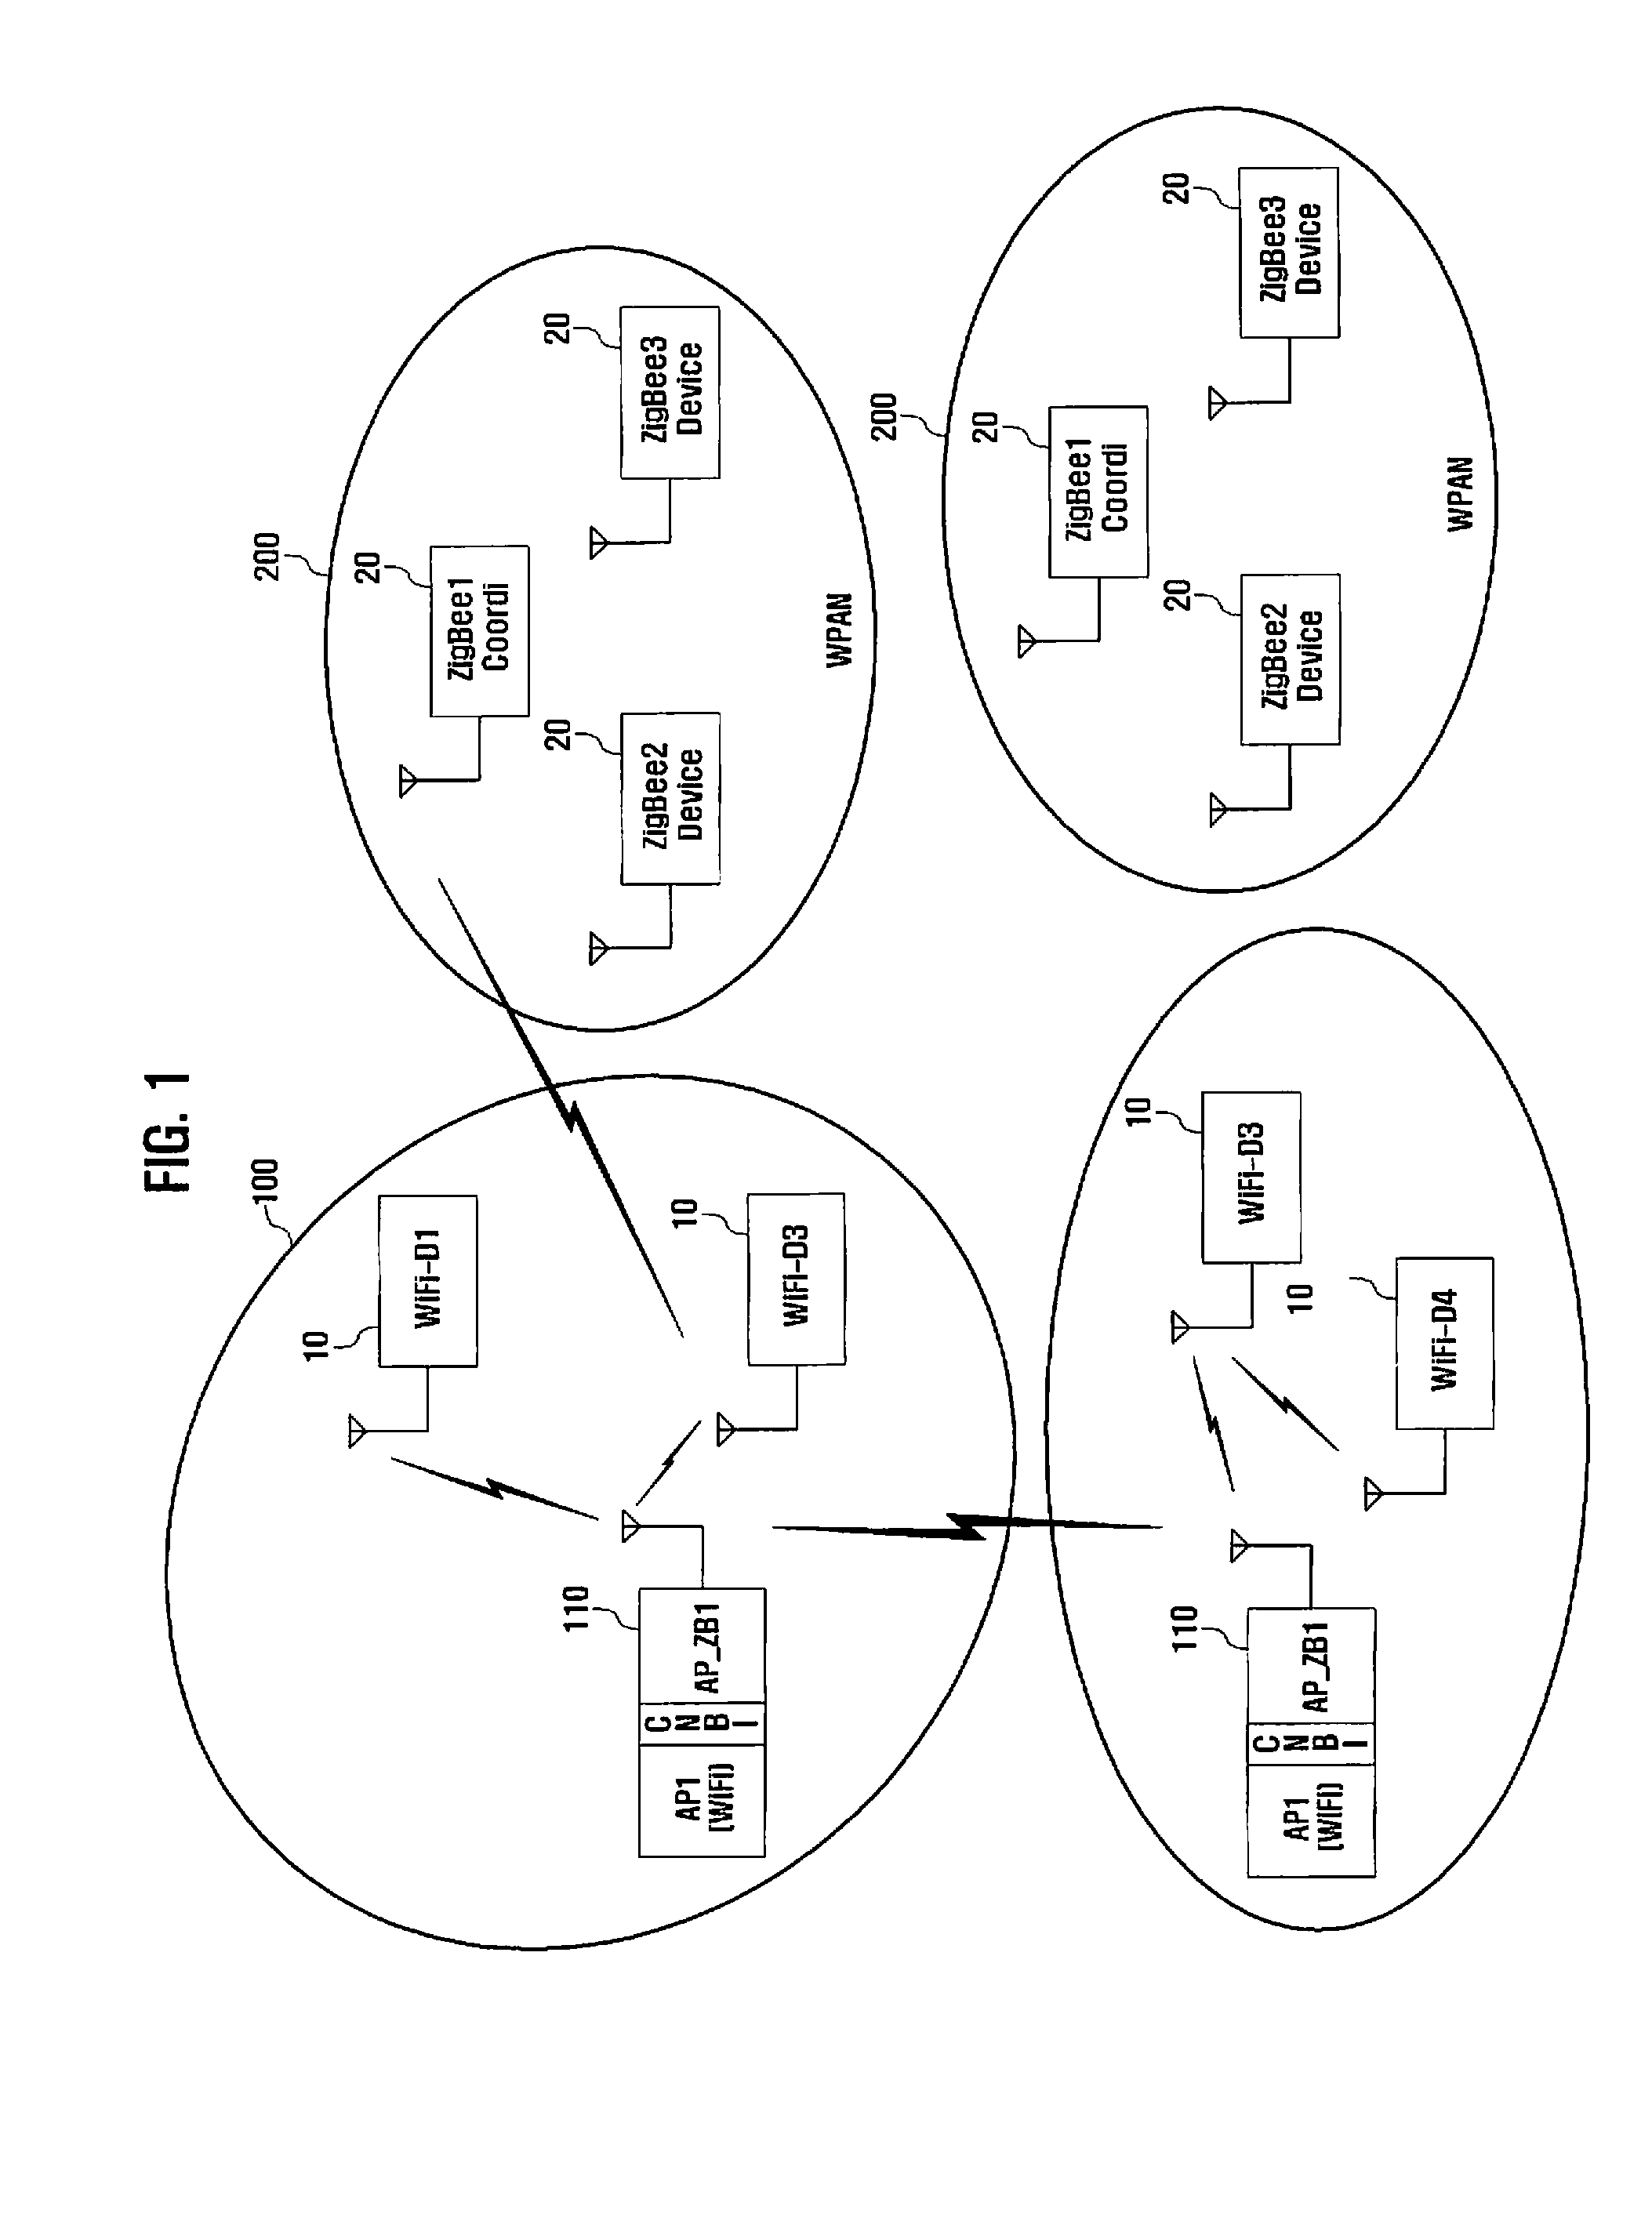 Channel allocation method and apparatus for wireless communication networks